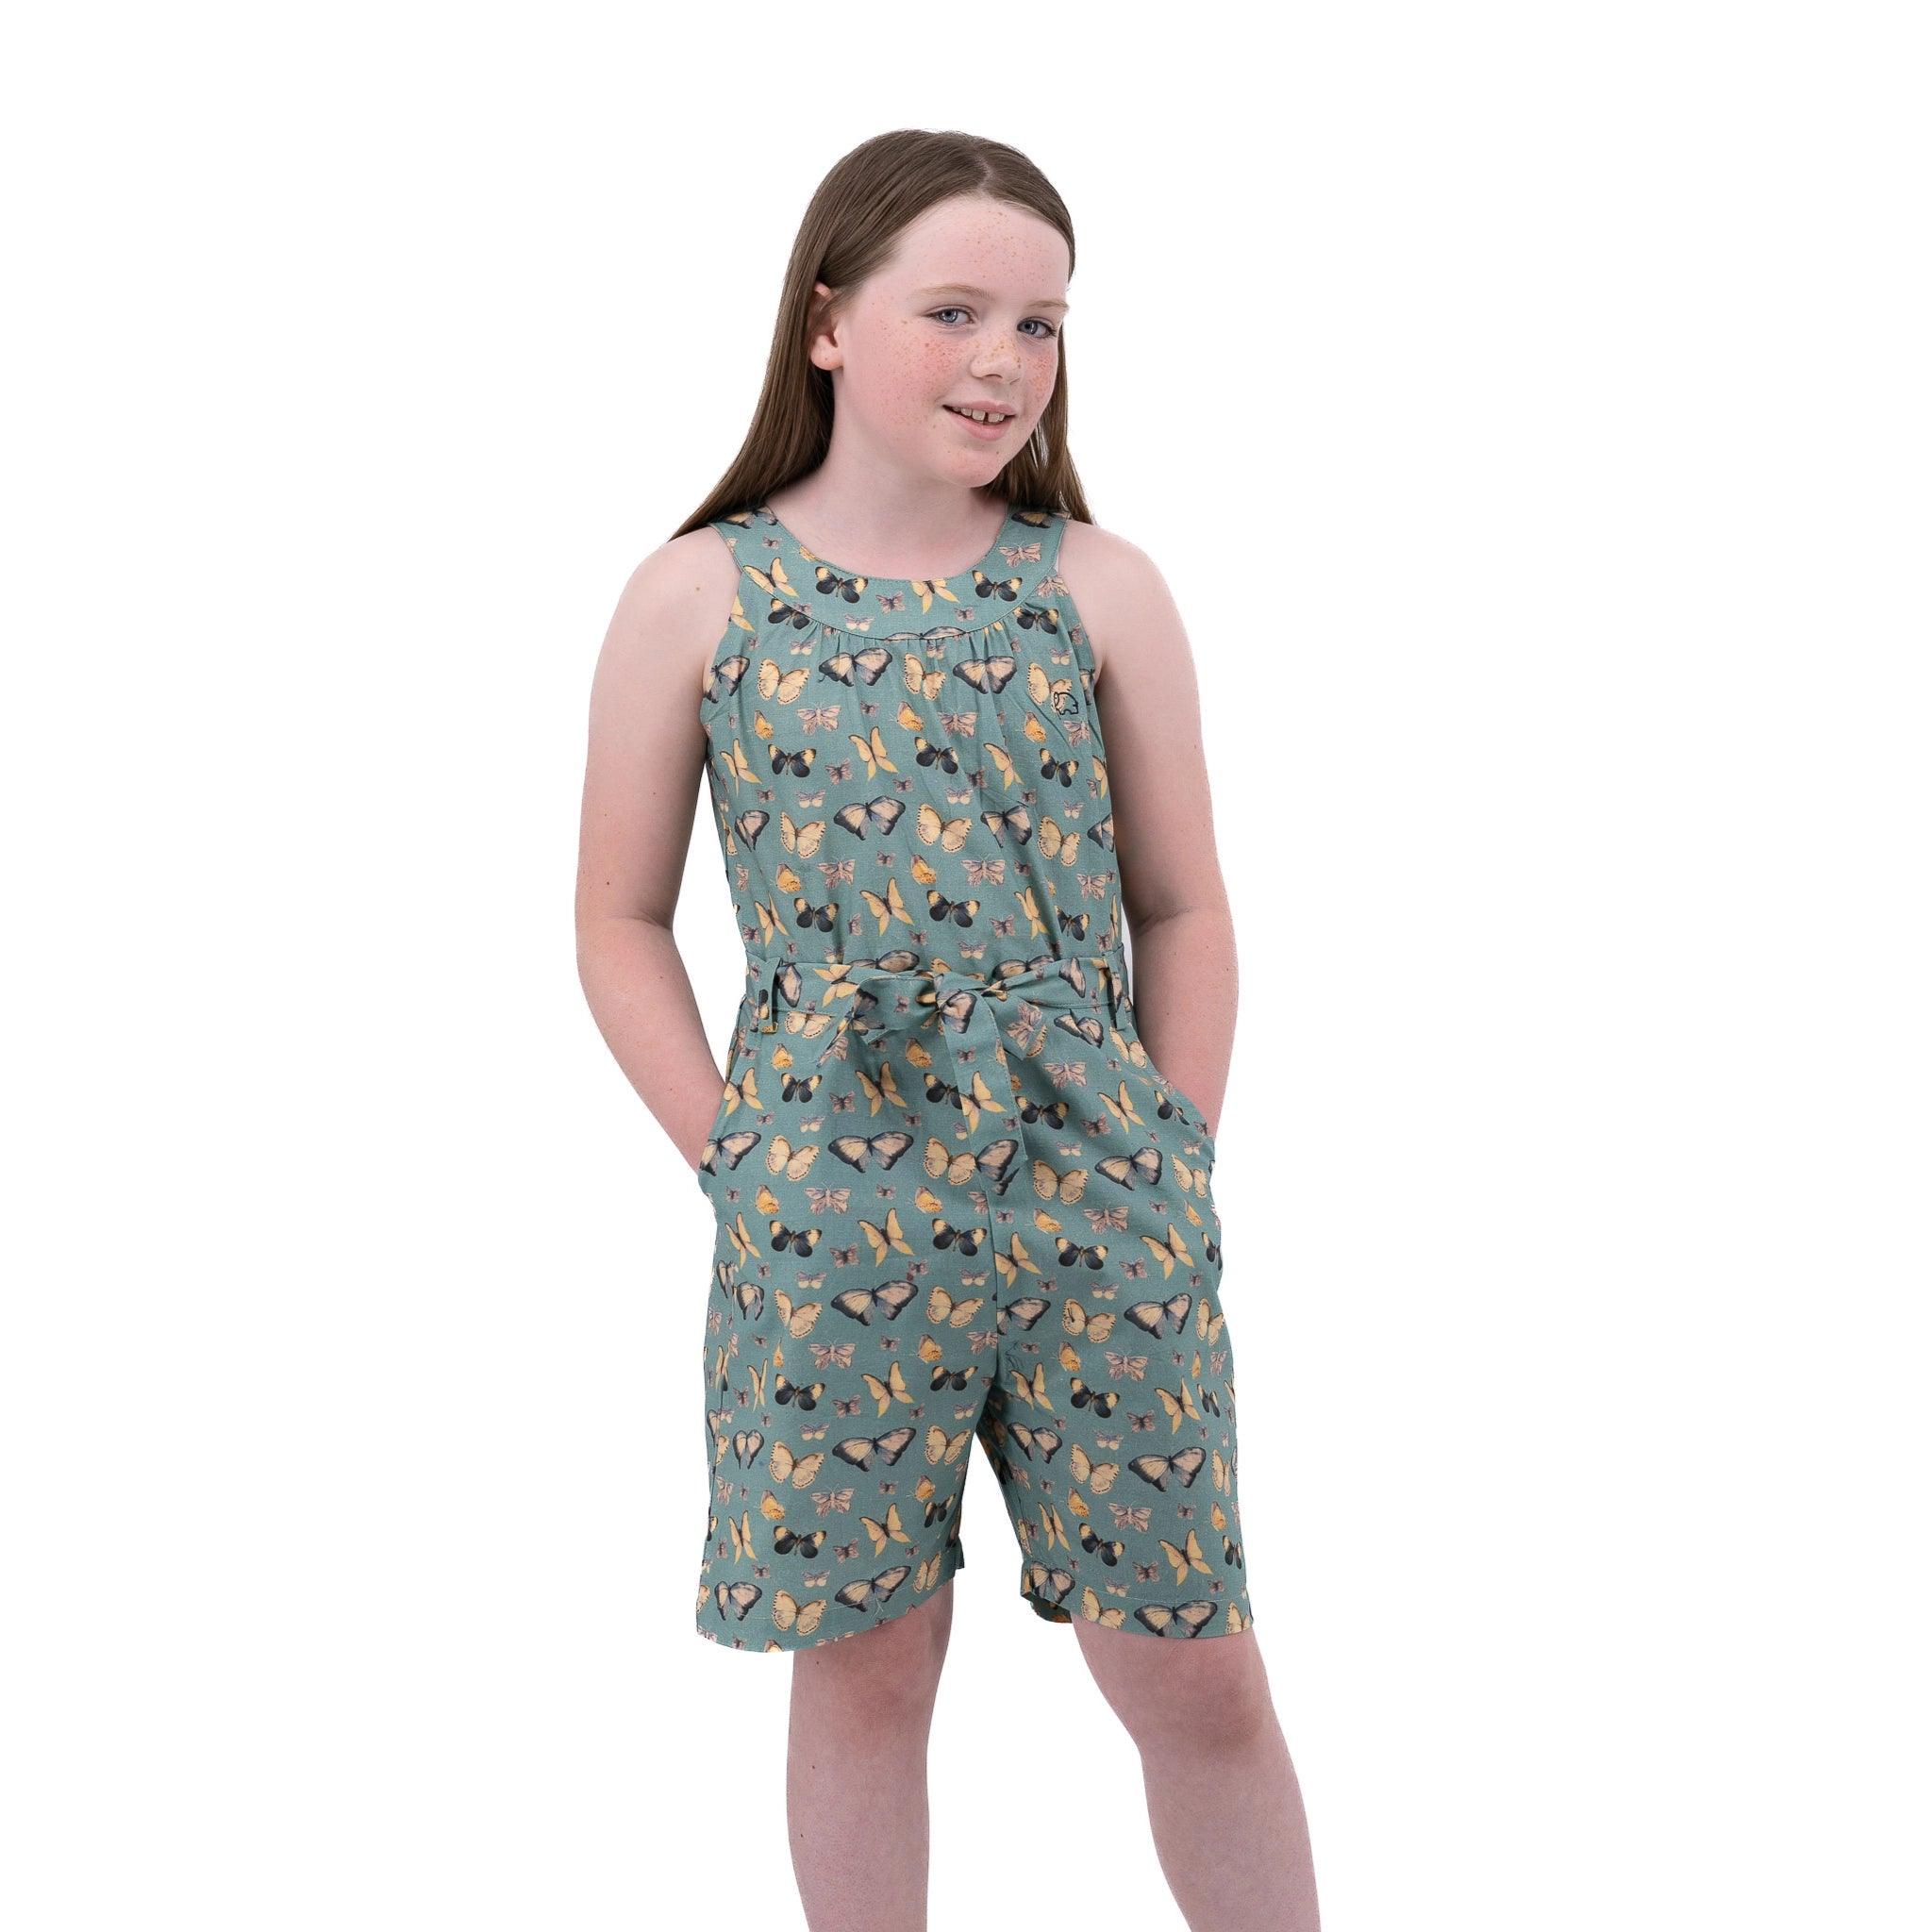 Young girl in a Karee Blue Surf Adventure-ready Cotton Play Suit standing against a white background, looking to the side with a subtle smile.